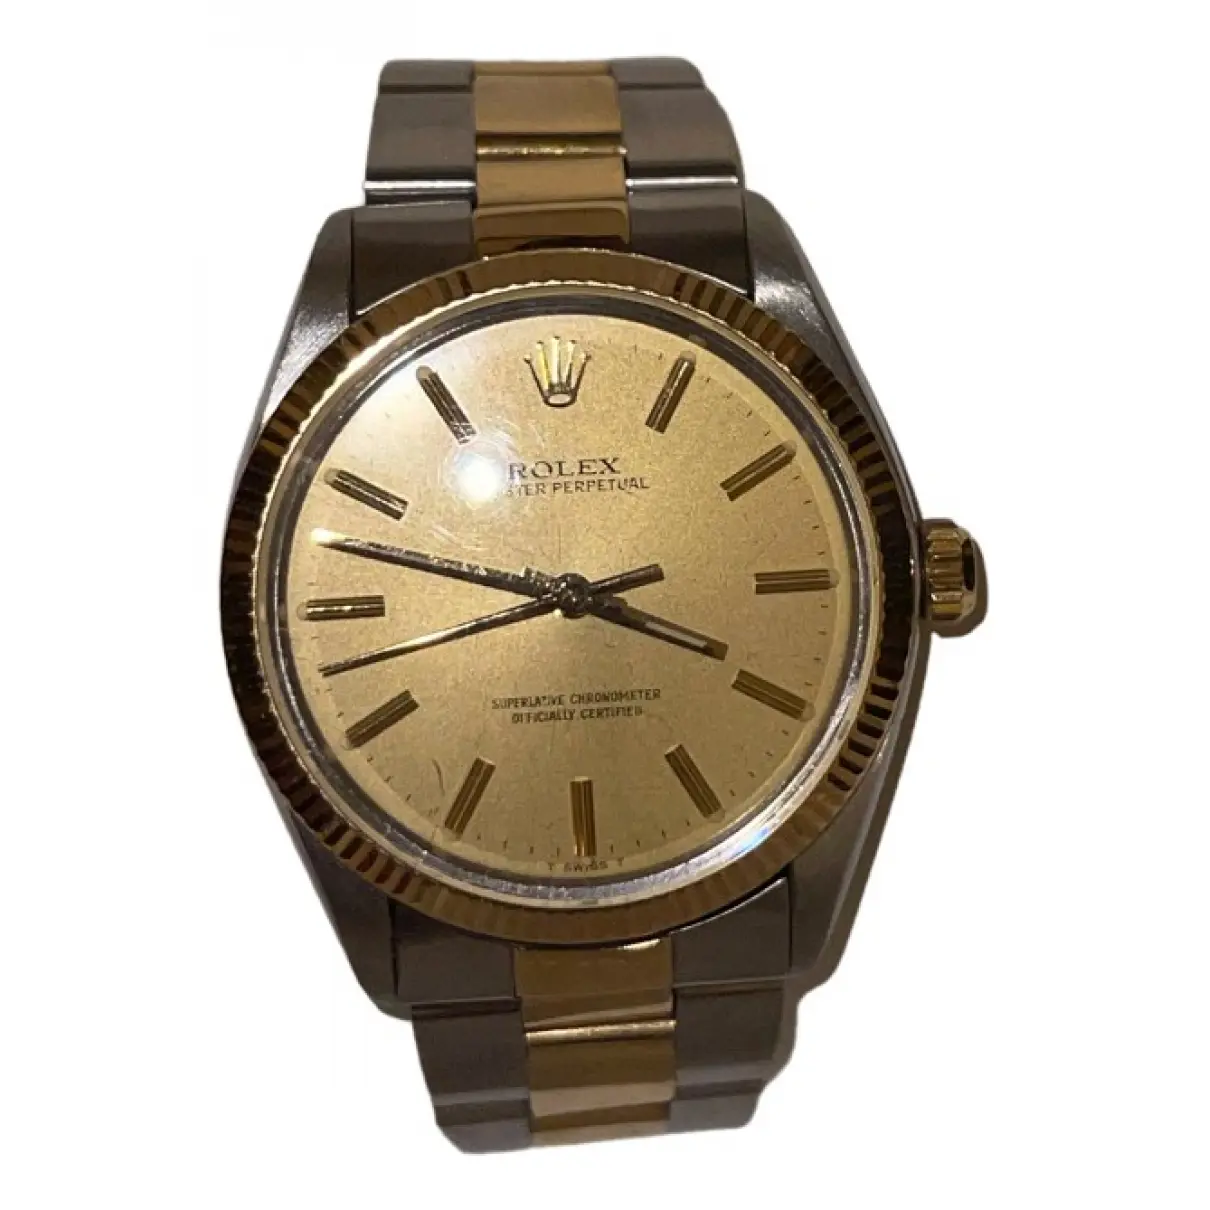 Oyster Perpetual watch Rolex - Vintage